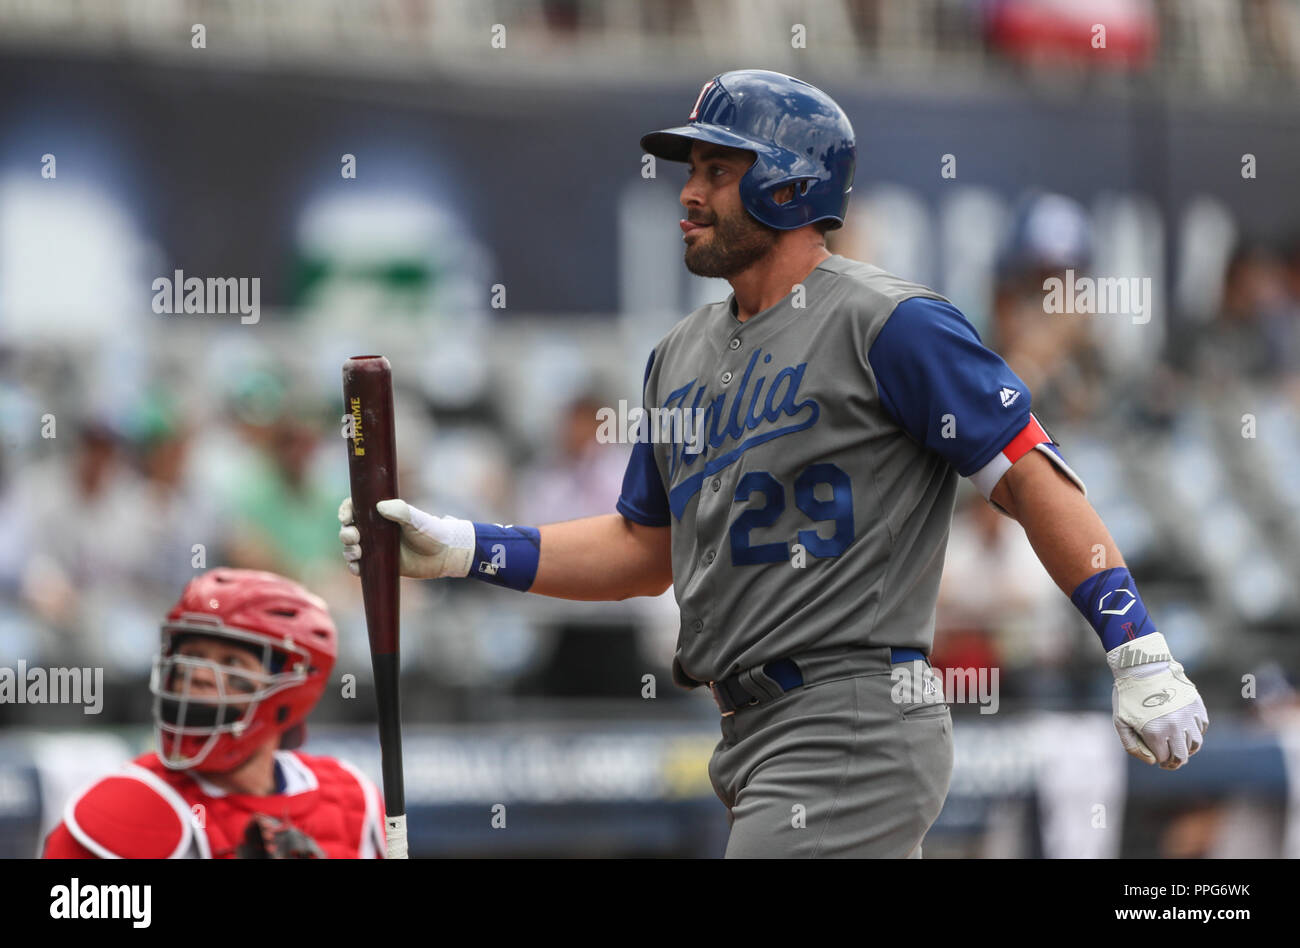 Francisco Cervelli High Resolution Stock Photography and Images - Alamy